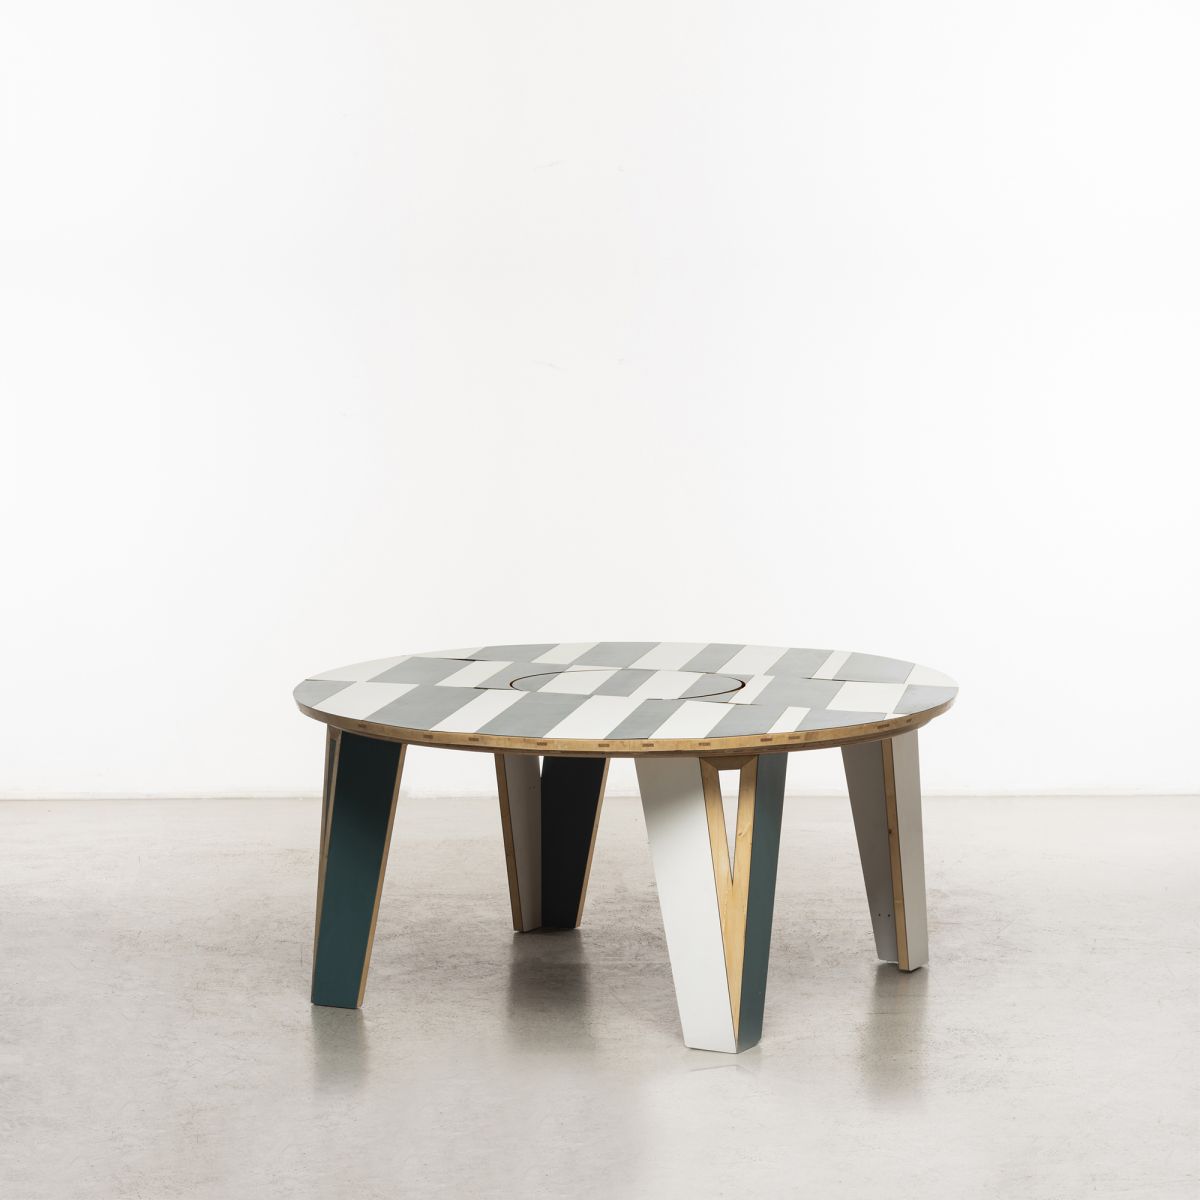 Low table Martino Gamper pic-1